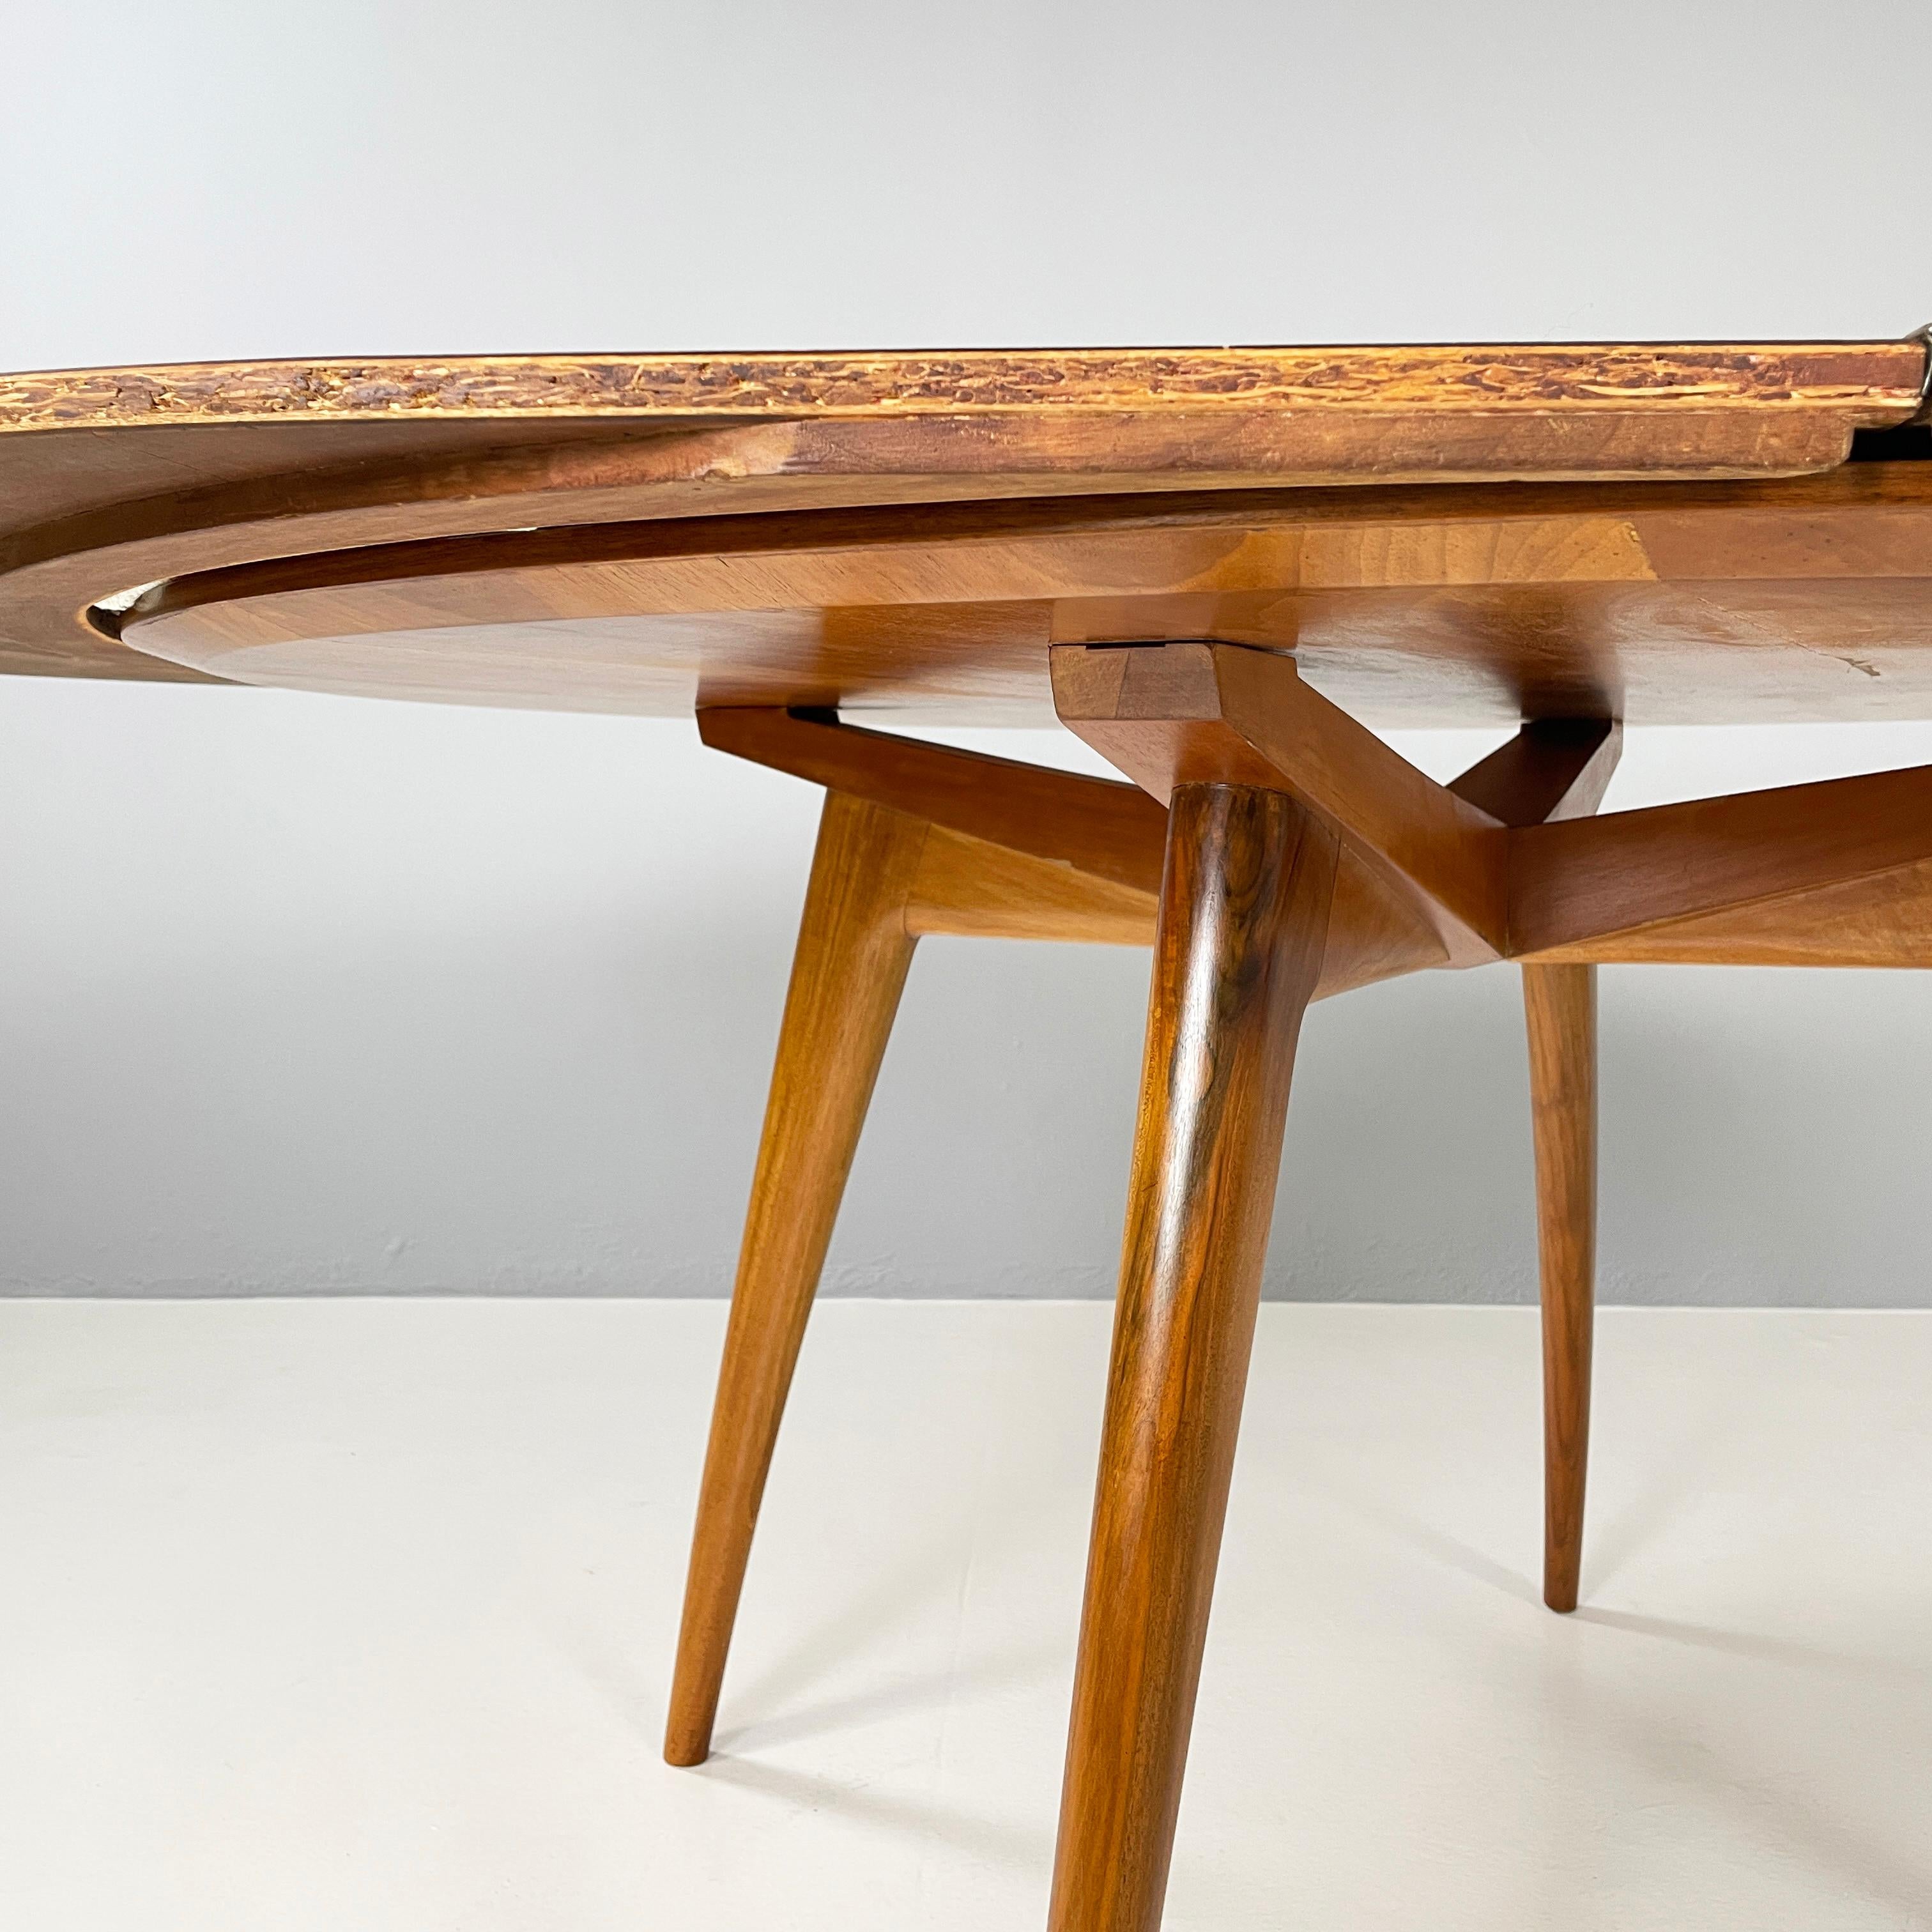 Italian mid-century modern Wooden dining table with extension, 1960s For Sale 8